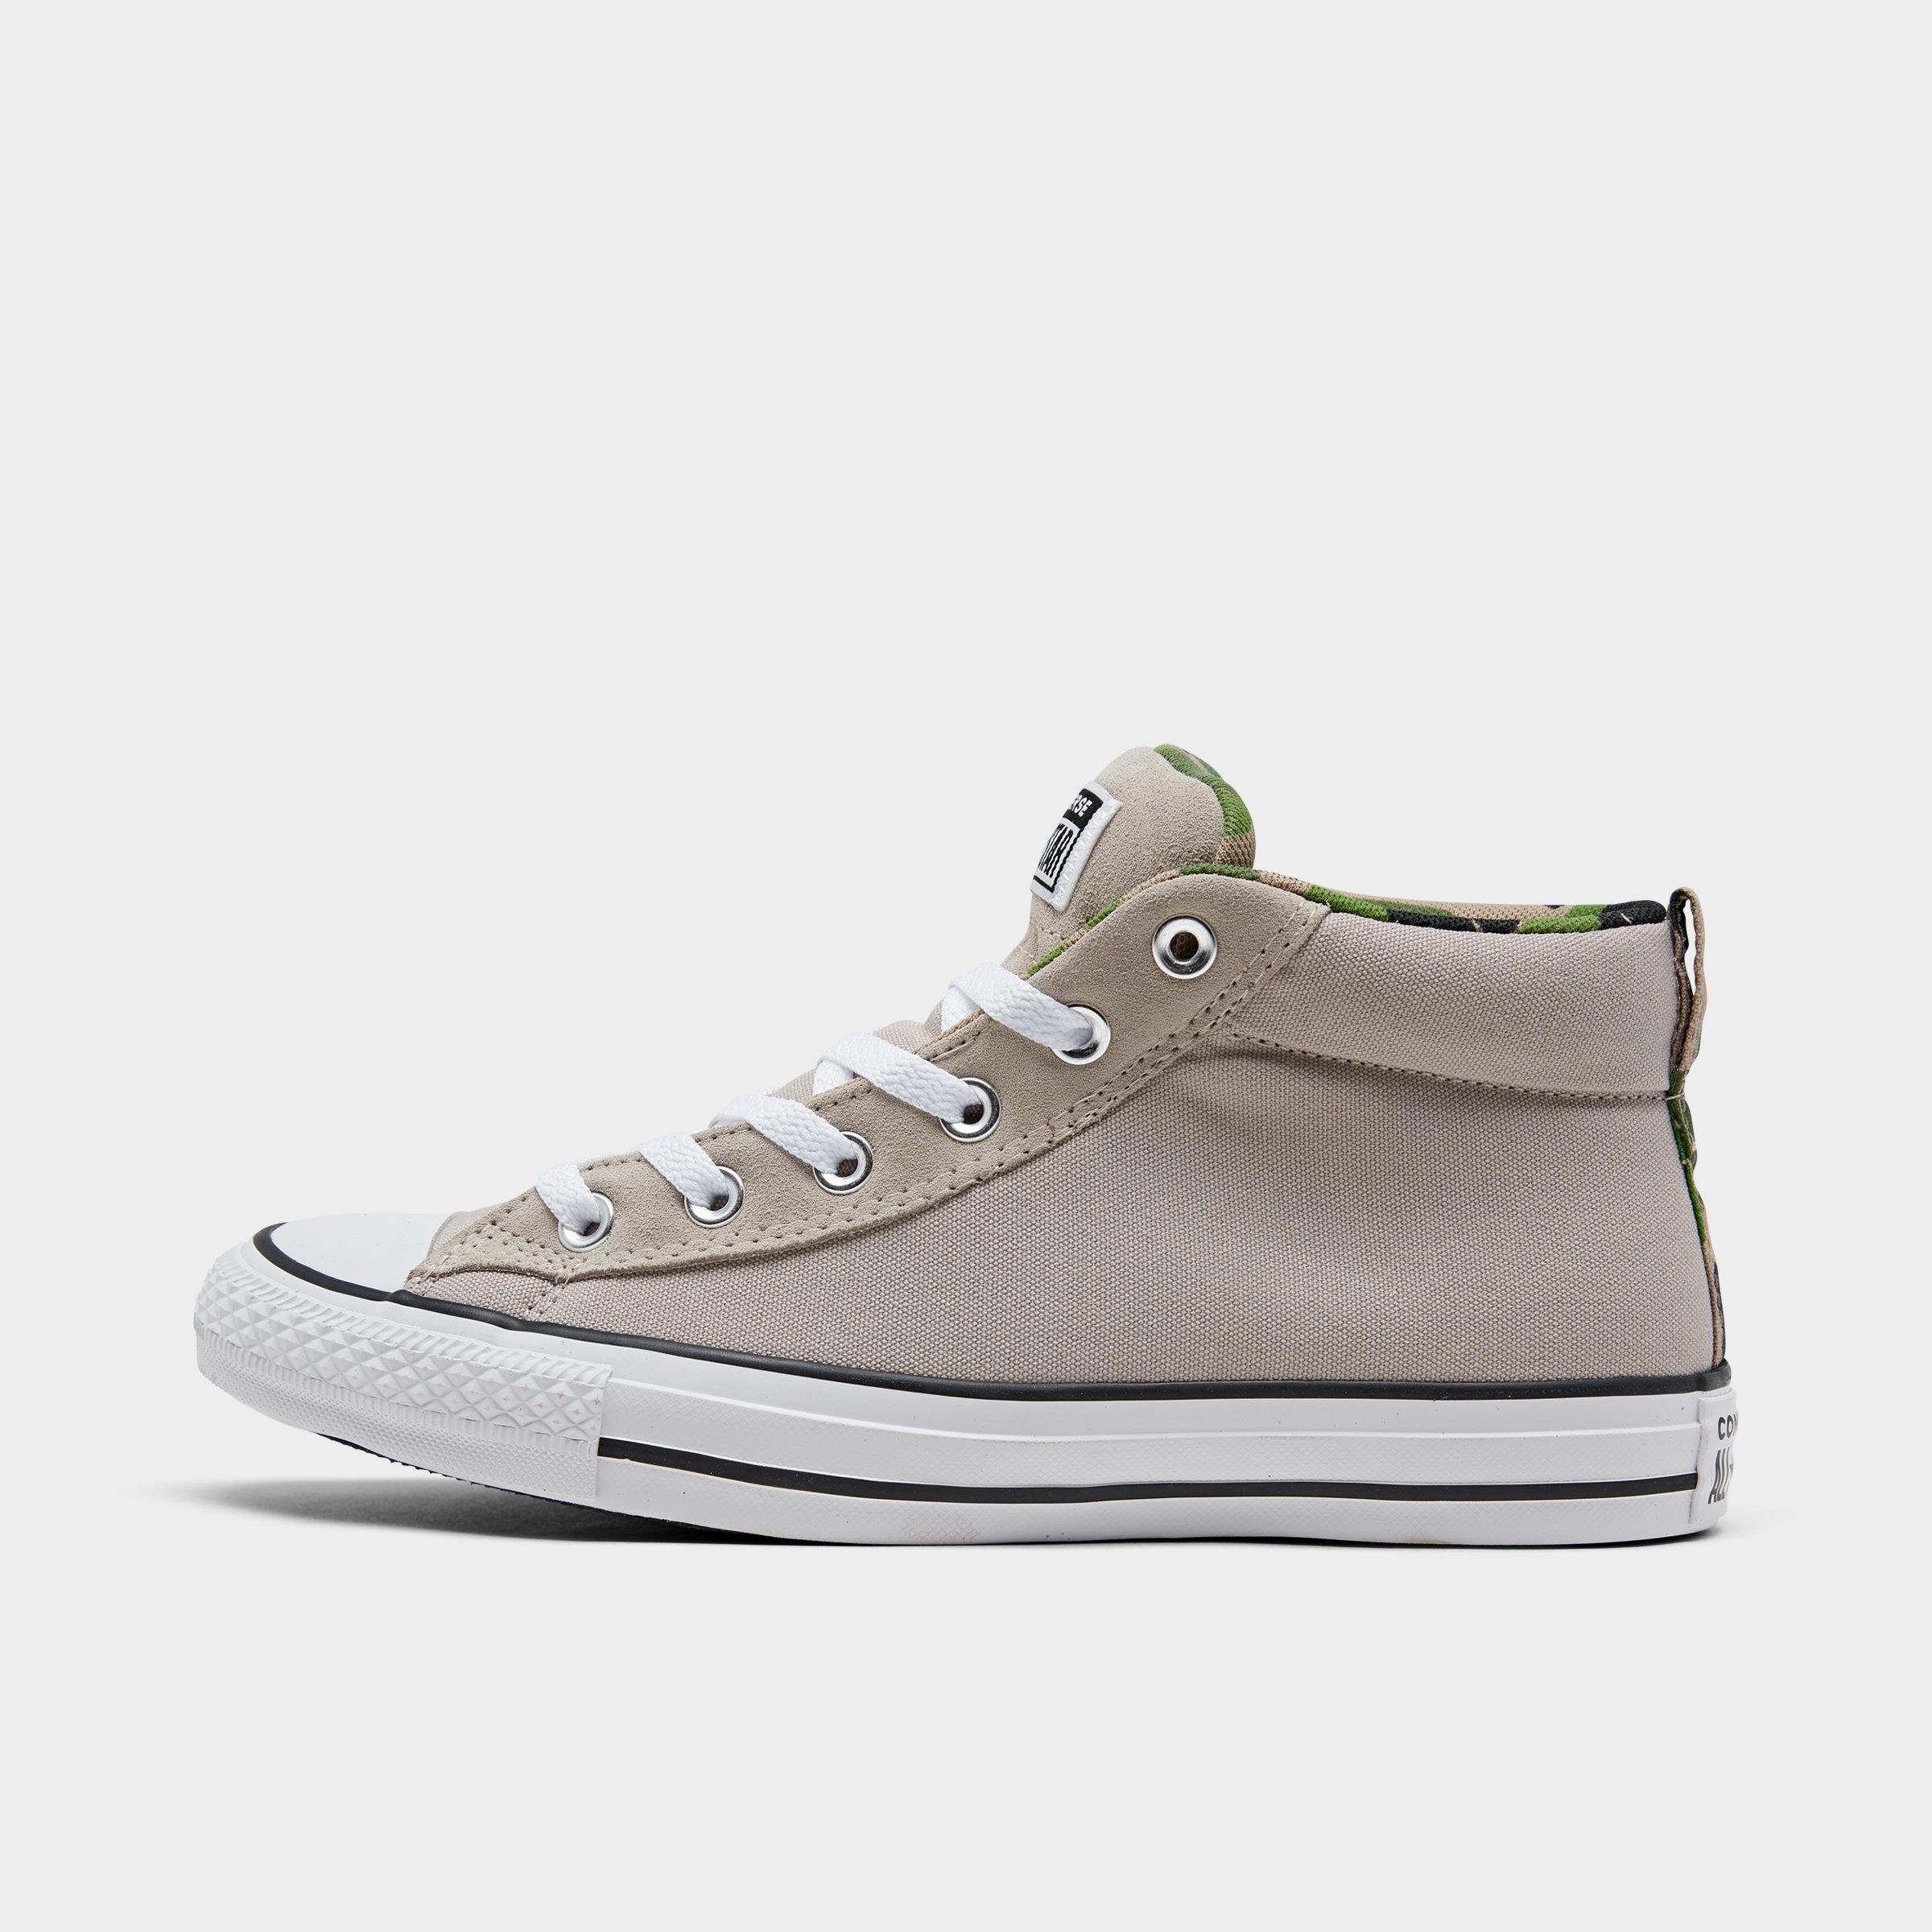 converse chuck taylor all star street mid men's sneakers